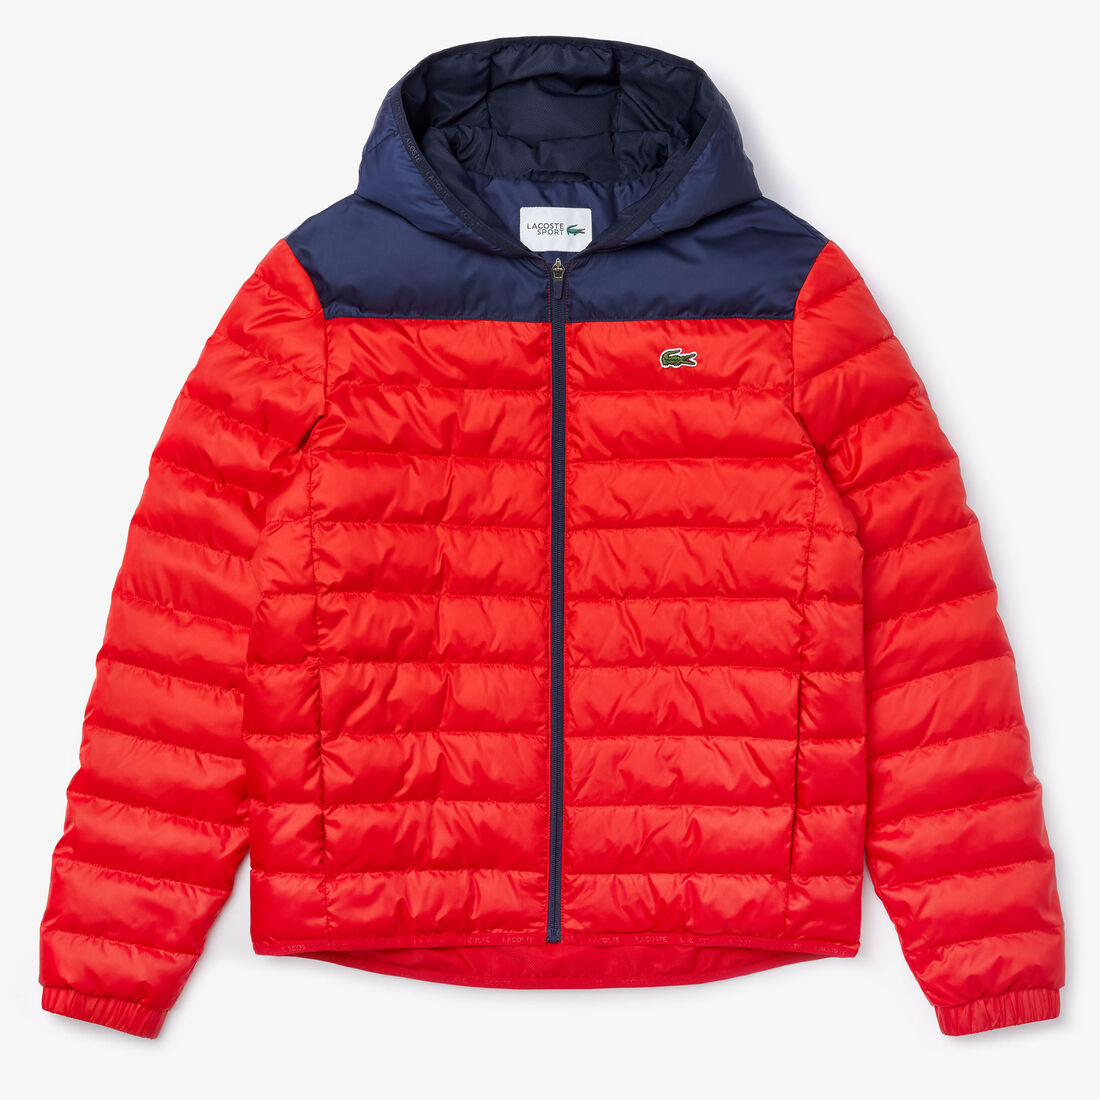 Men's Lacoste SPORT Hooded Water-Resistant Quilted Jacket